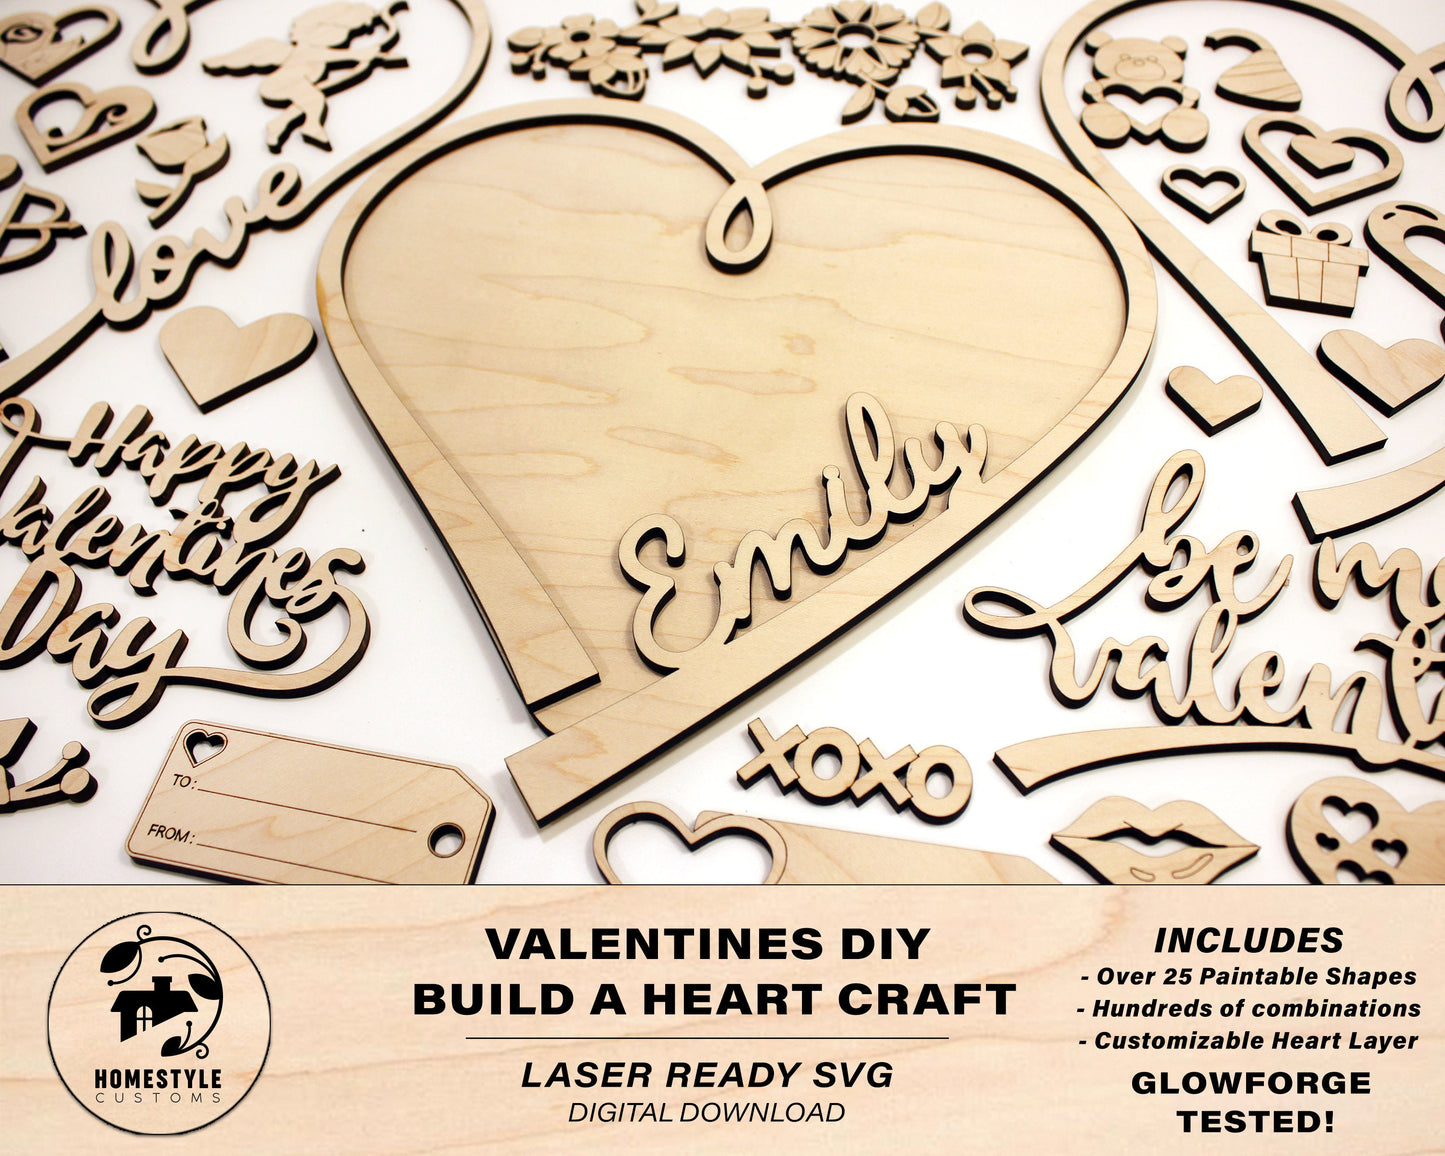 Valentines DIY Build a Heart Paint Craft - SVG File Download - Sized for Glowforge